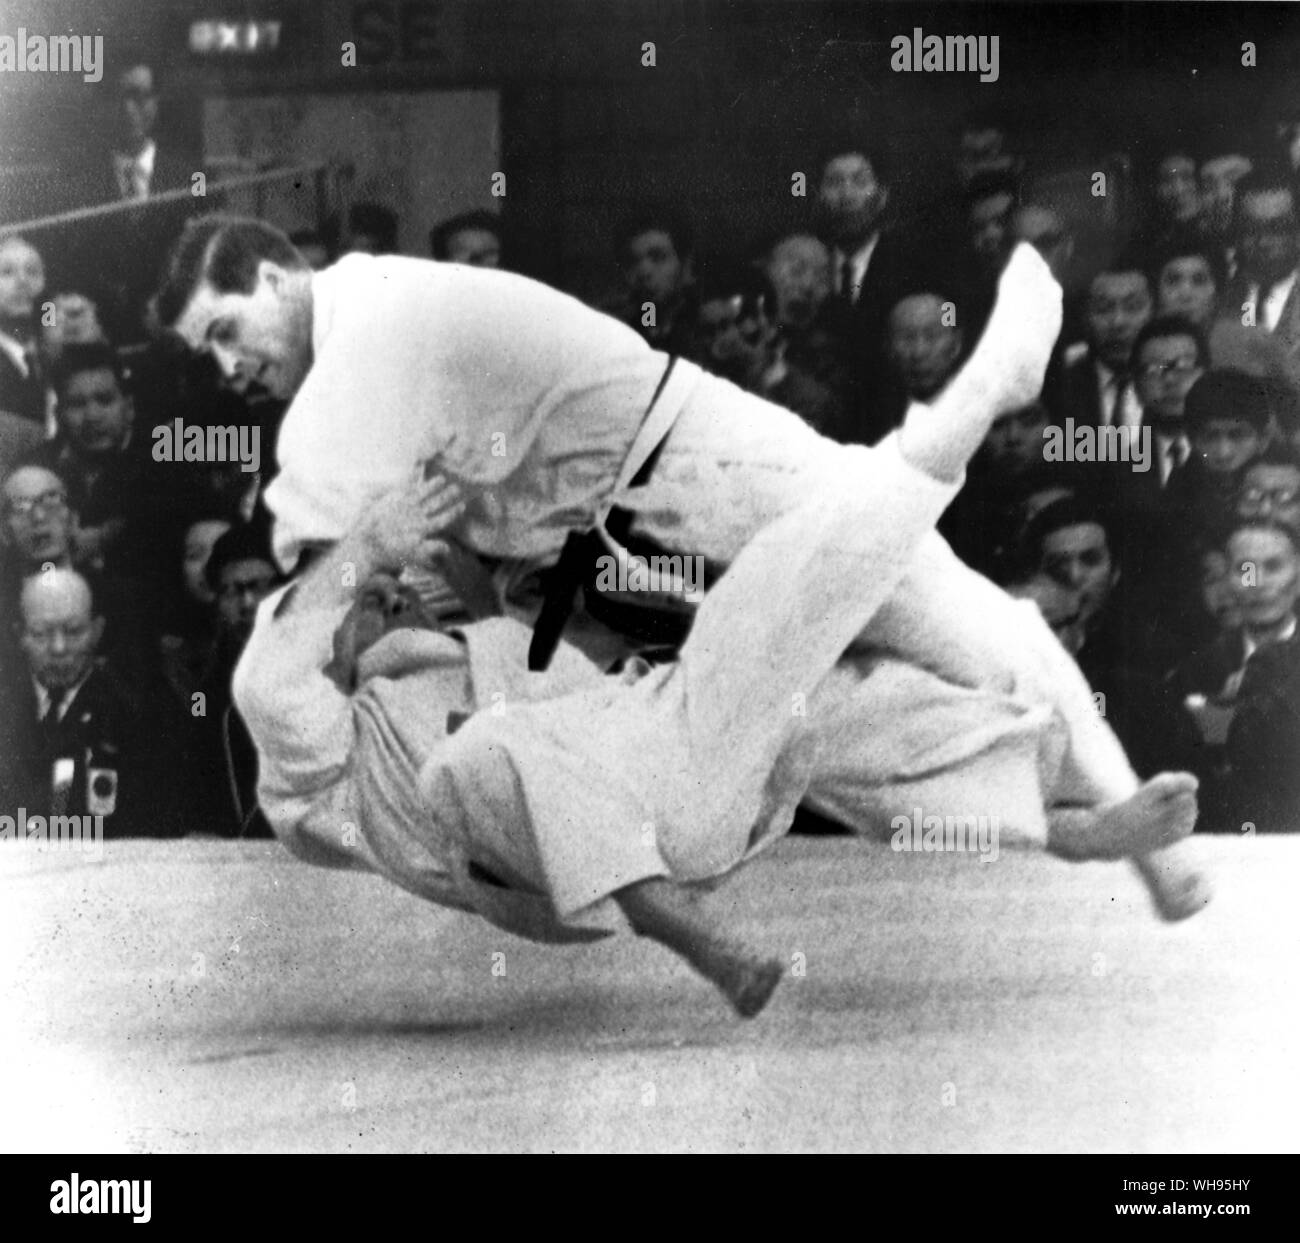 Japan, Tokyo Olympic Games, 1964: Anton Geesink (Netherlands) lands a throw on D A Petheridge (Great Britain) during their judo bout.. Stock Photo